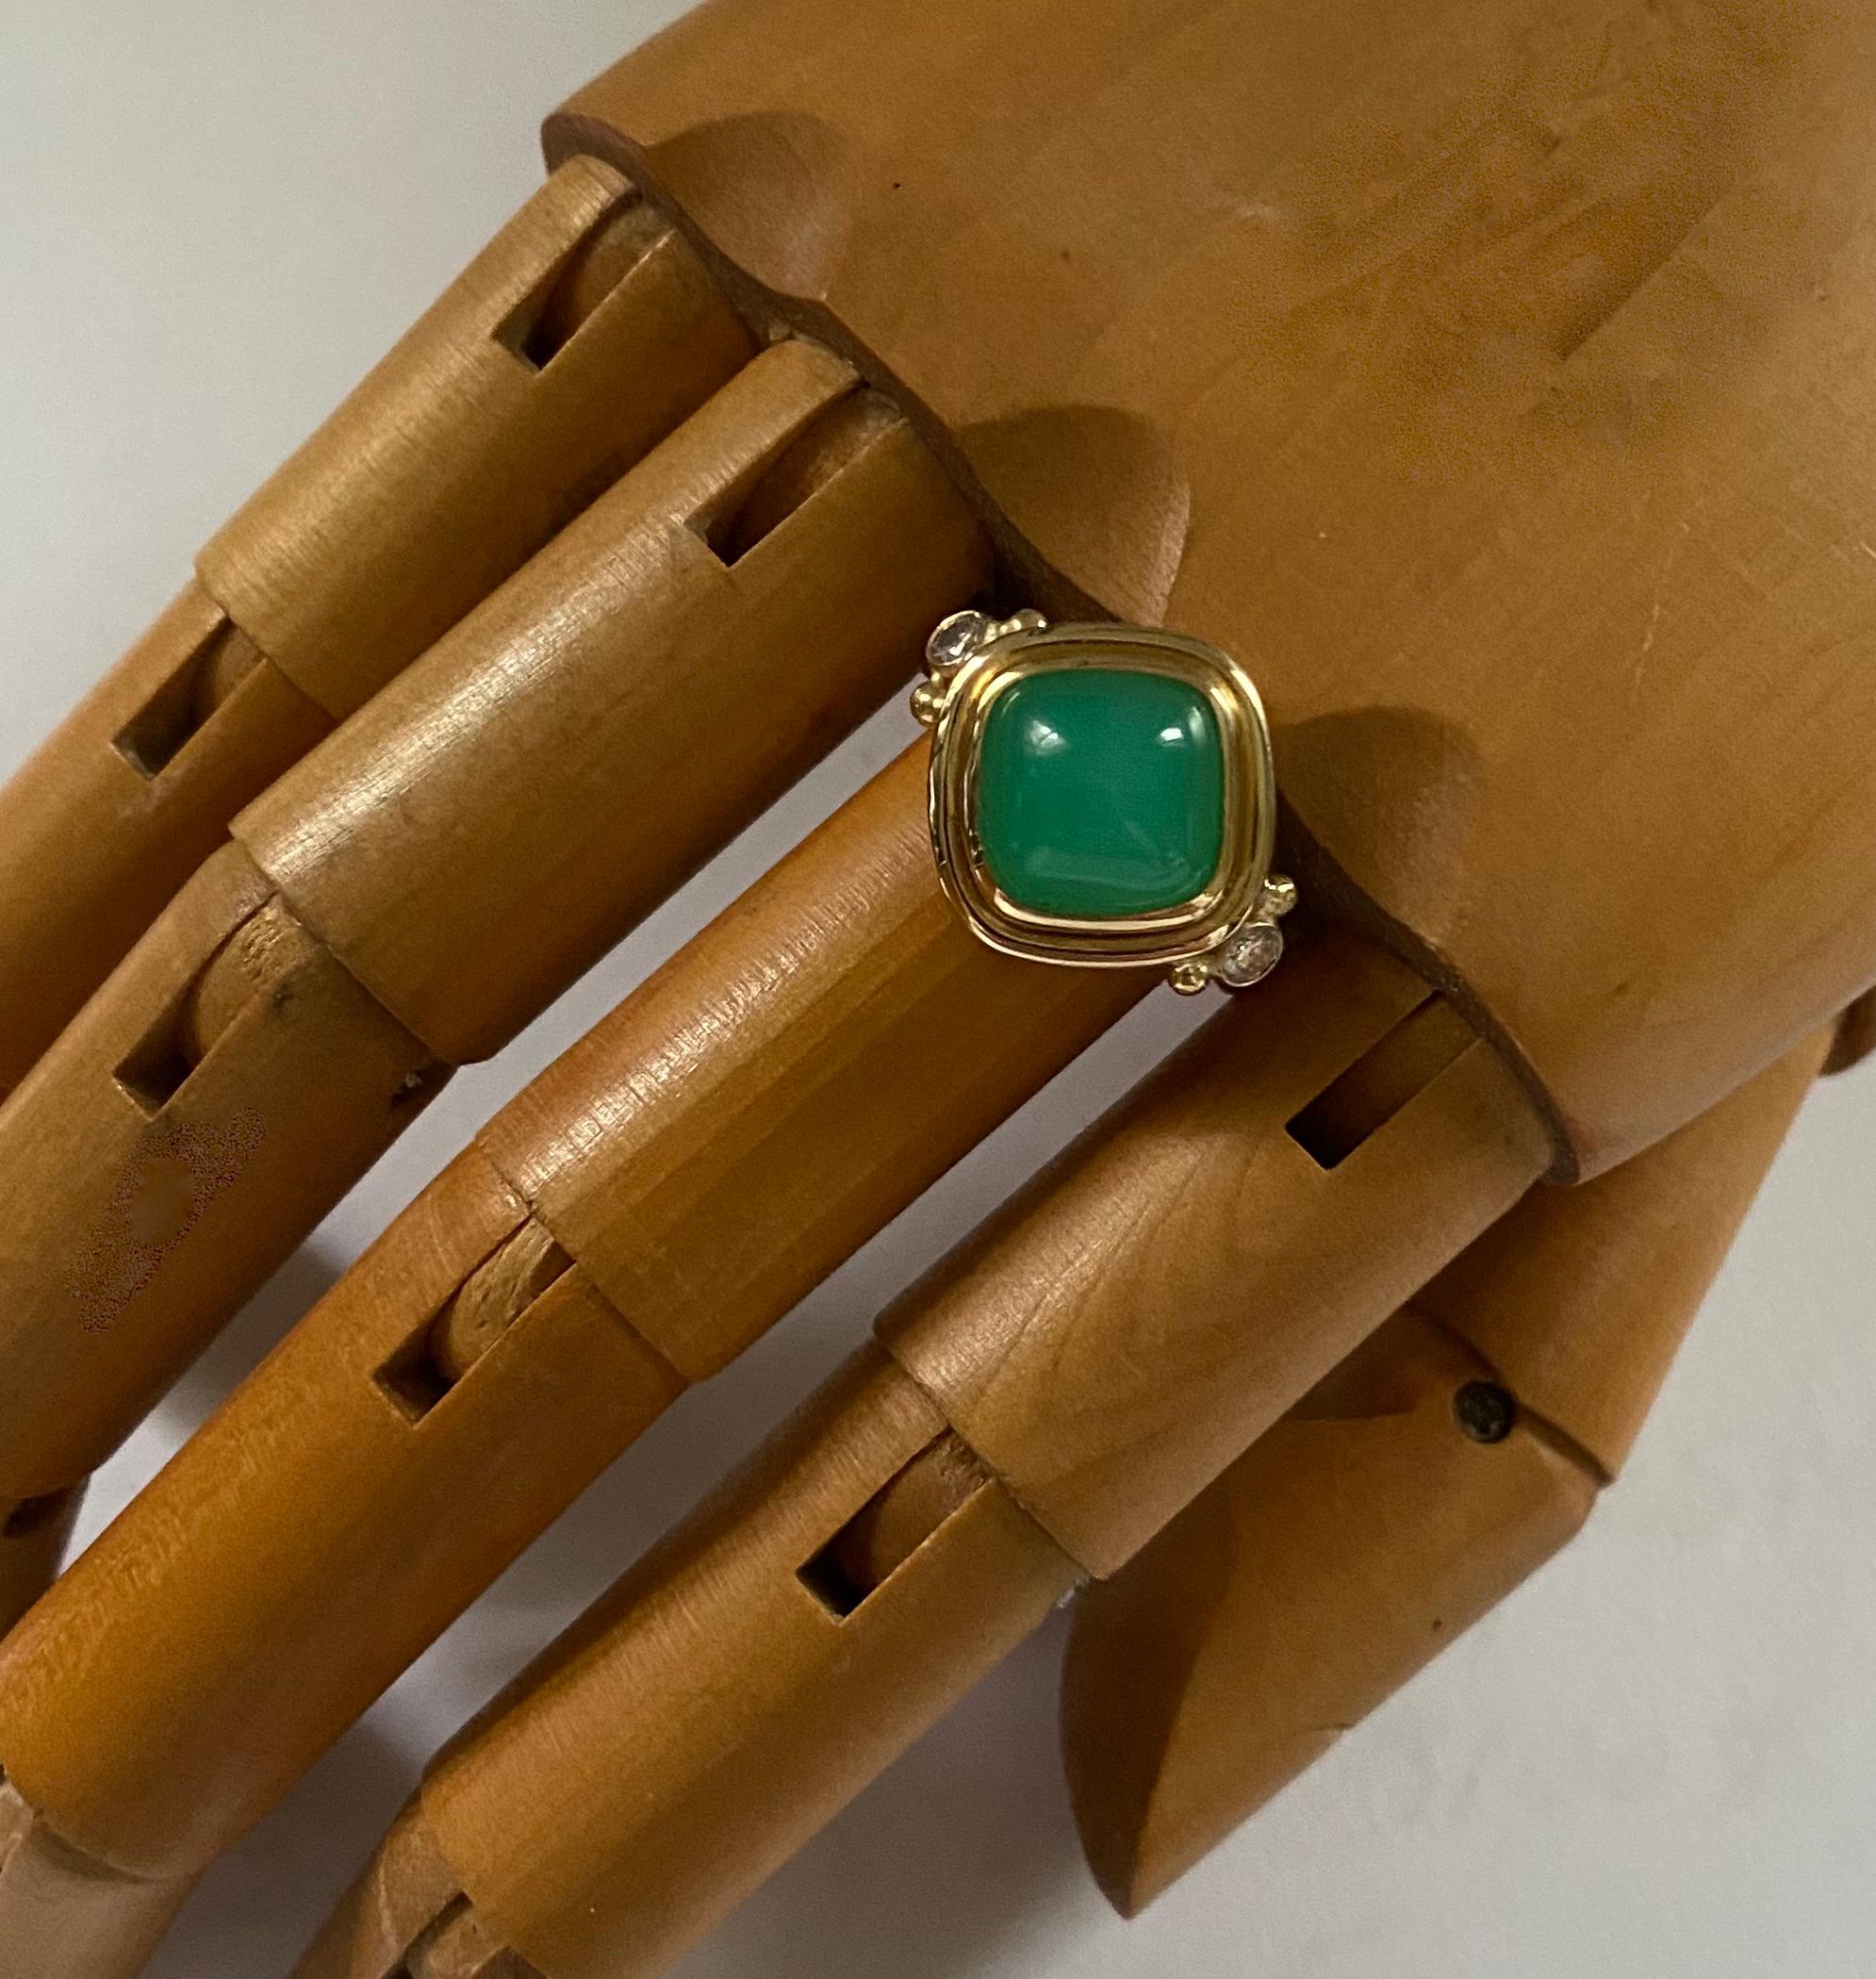 Gem quality chrysoprase is featured in this archaic style ring.  The chrysoprase (origin: Australia) is a rich apple green color and has been expertly cut into a sugarloaf cabochon shape.  The gem is bezel set and flanked by 2 white diamonds. 